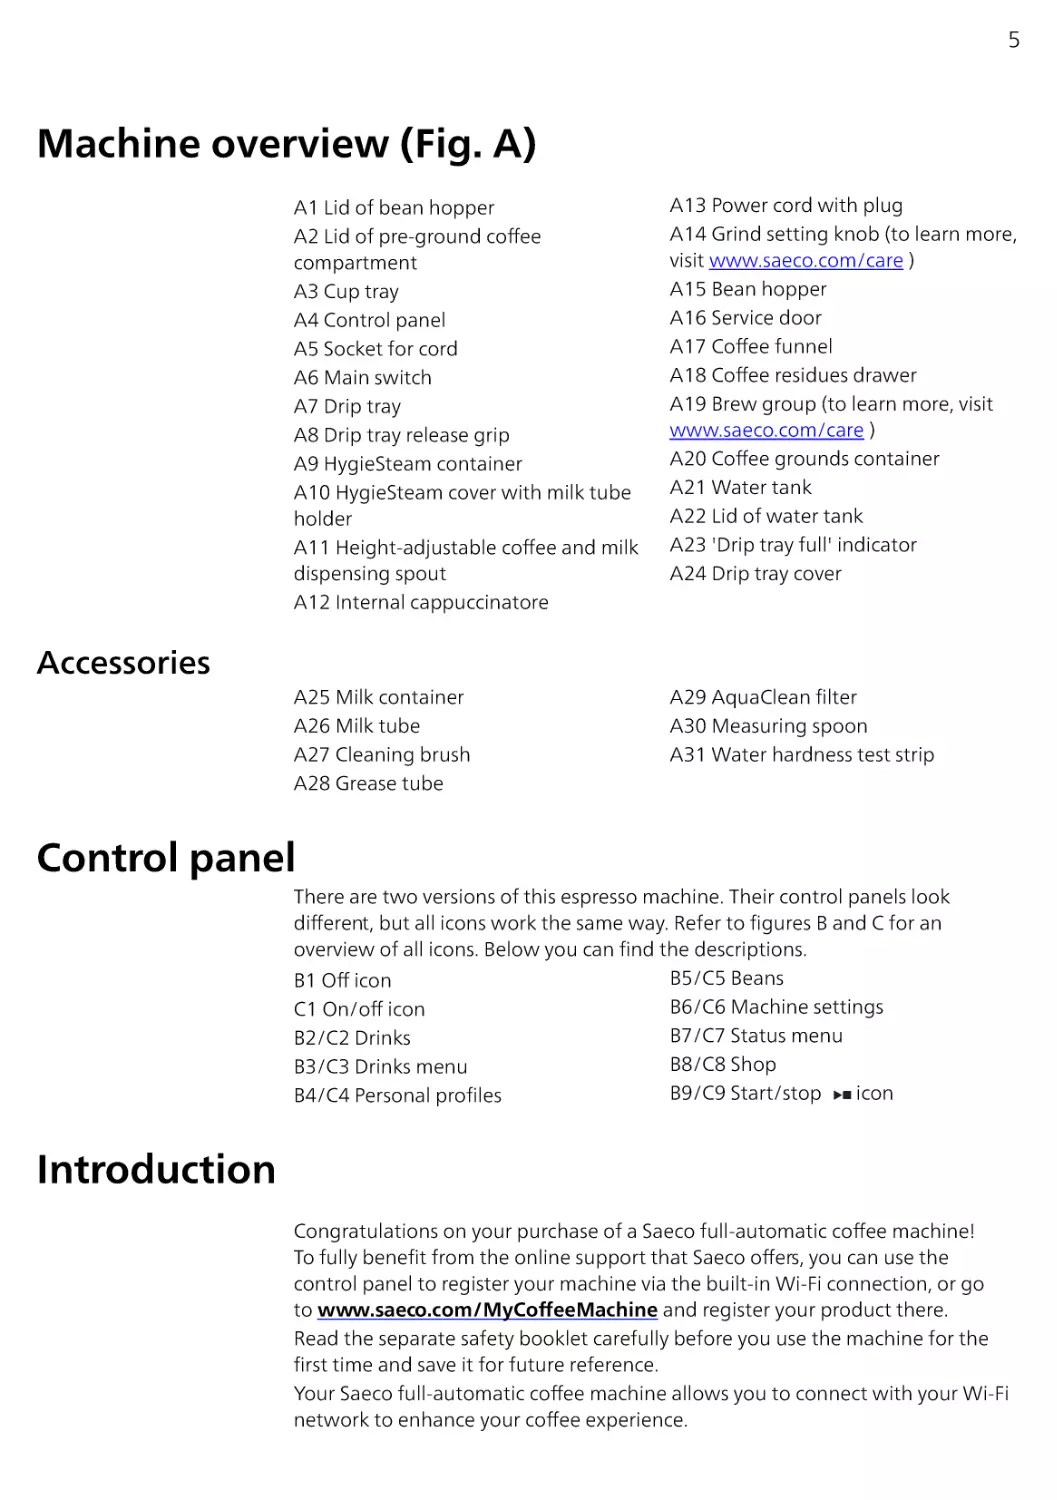 Machine overview (Fig. A)
Accessories
Control panel
Introduction